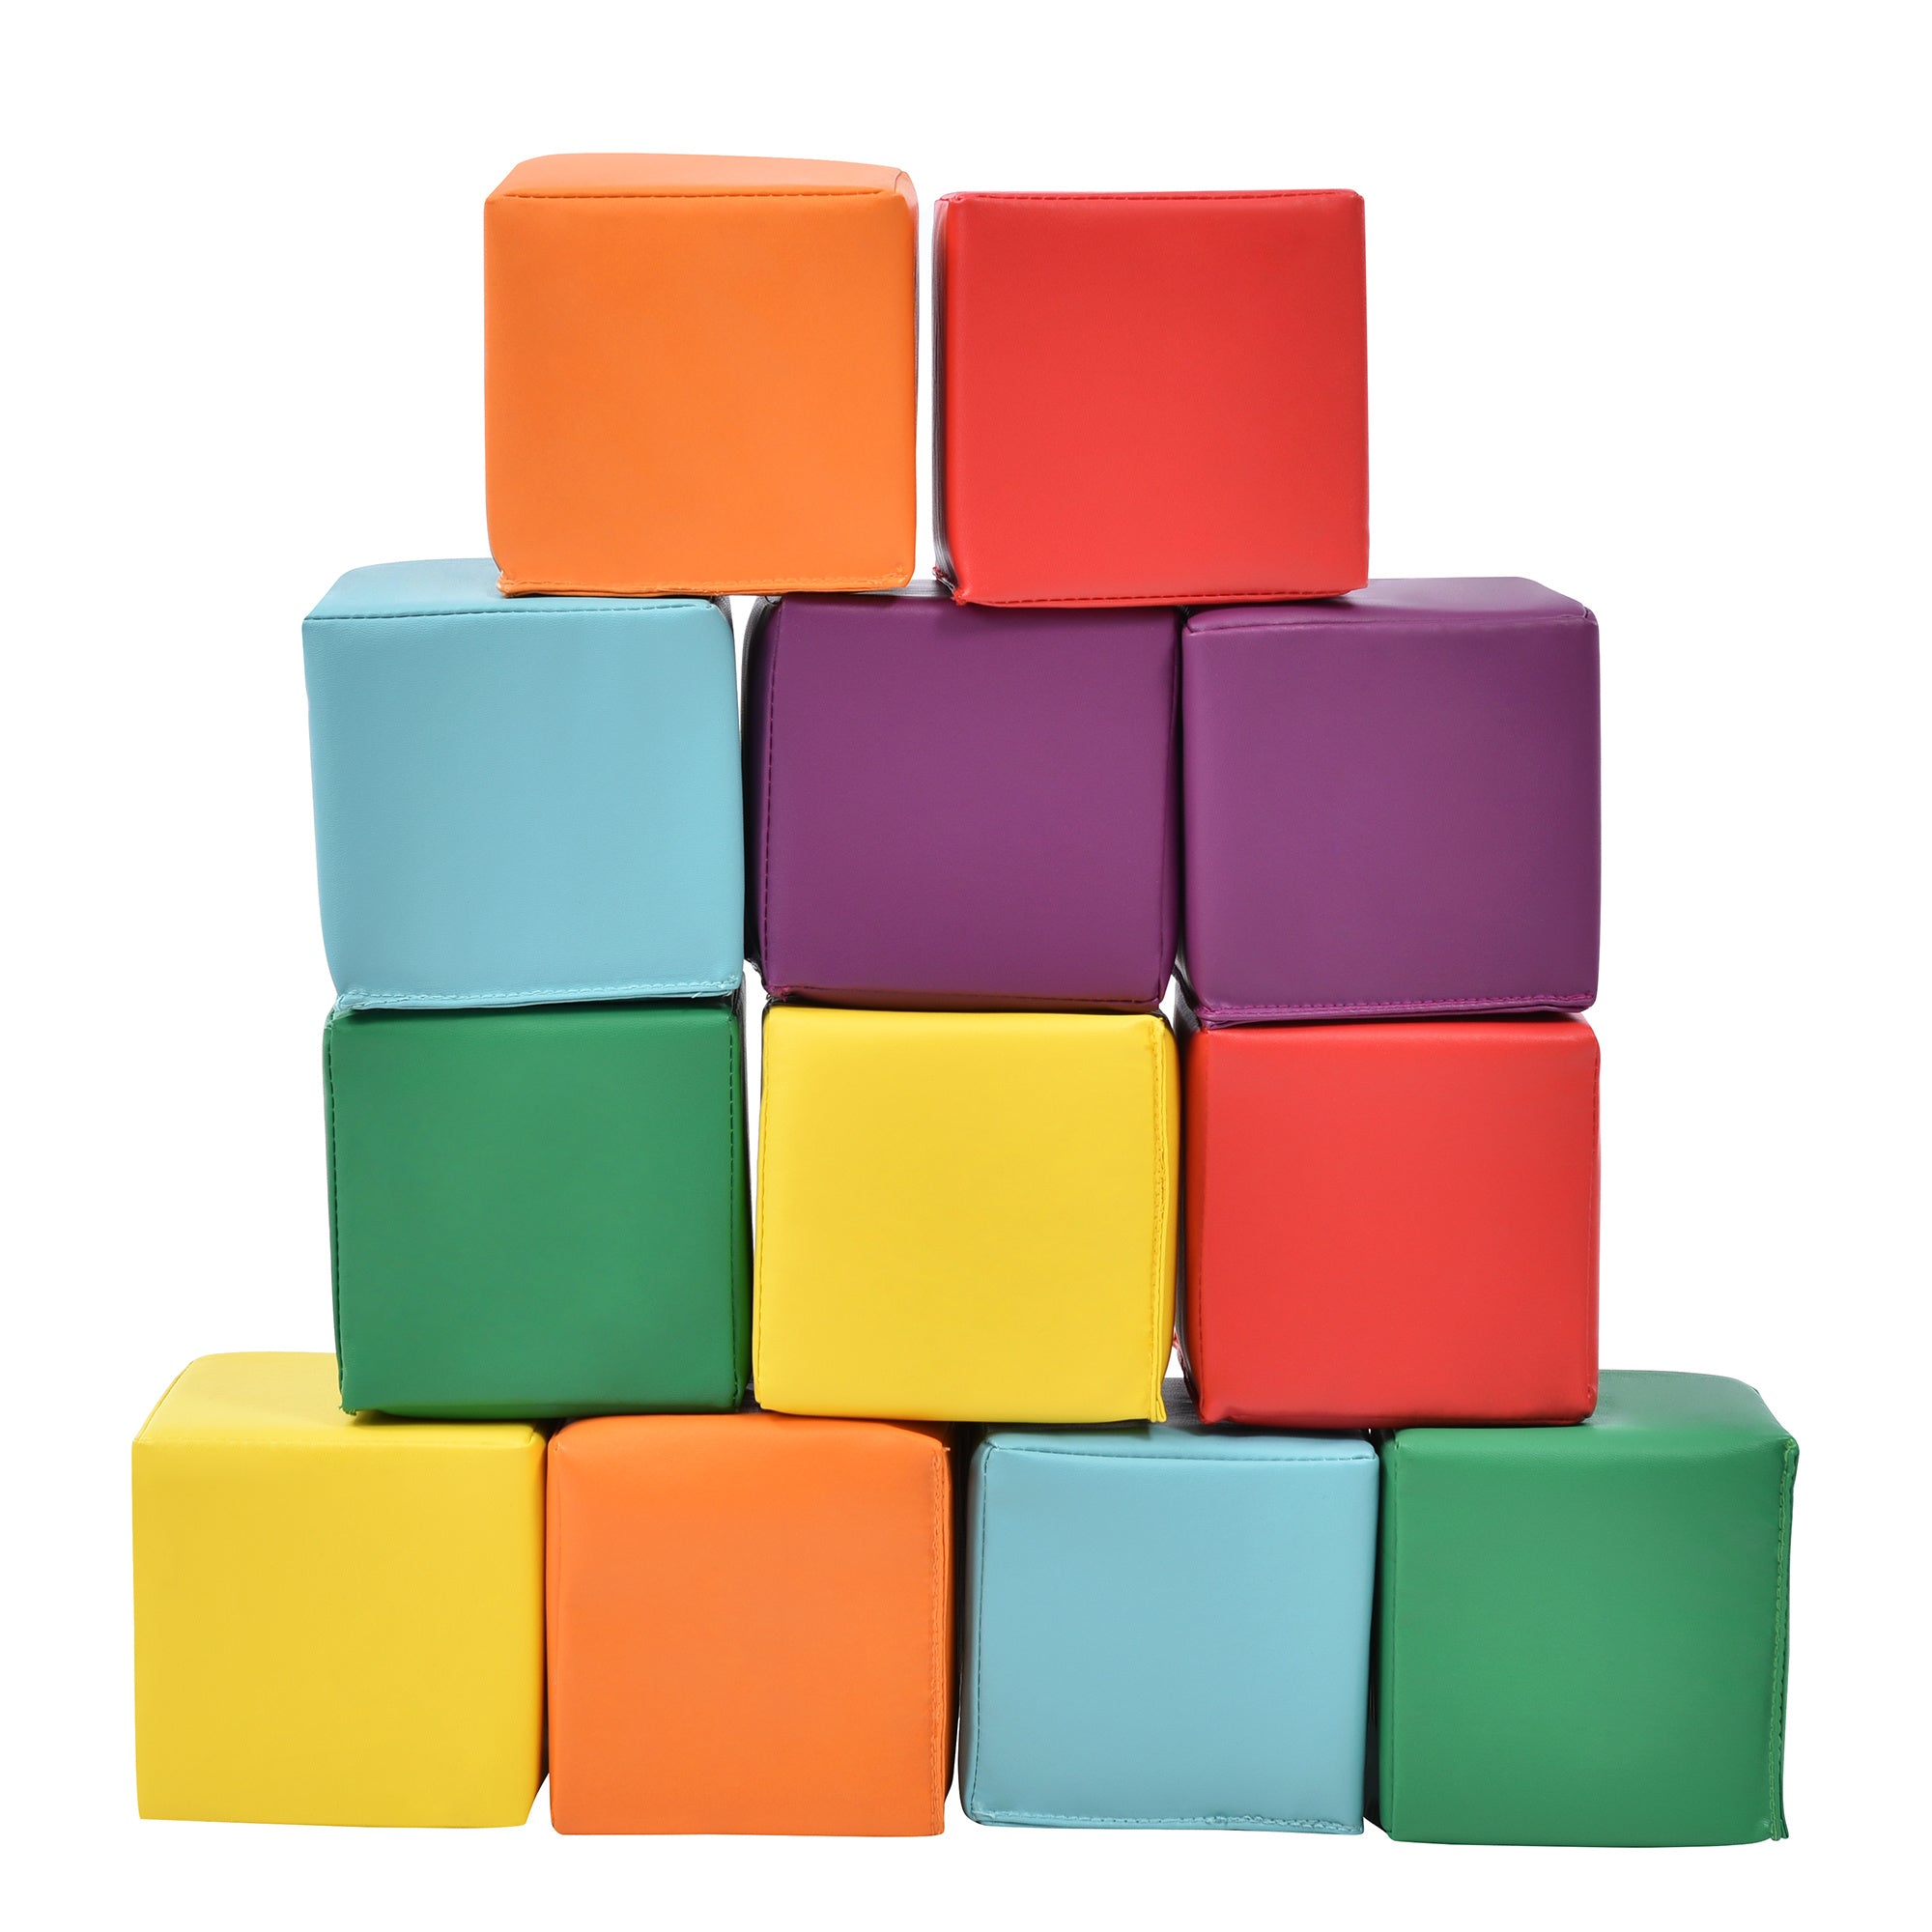 SoftZone Toddler Foam Block Playset; Soft Colorful Stacking Play Module Blocks Big Foam Shapes for Babies and Kids Building; Easy Clean Safe Indoor Active Play Structure